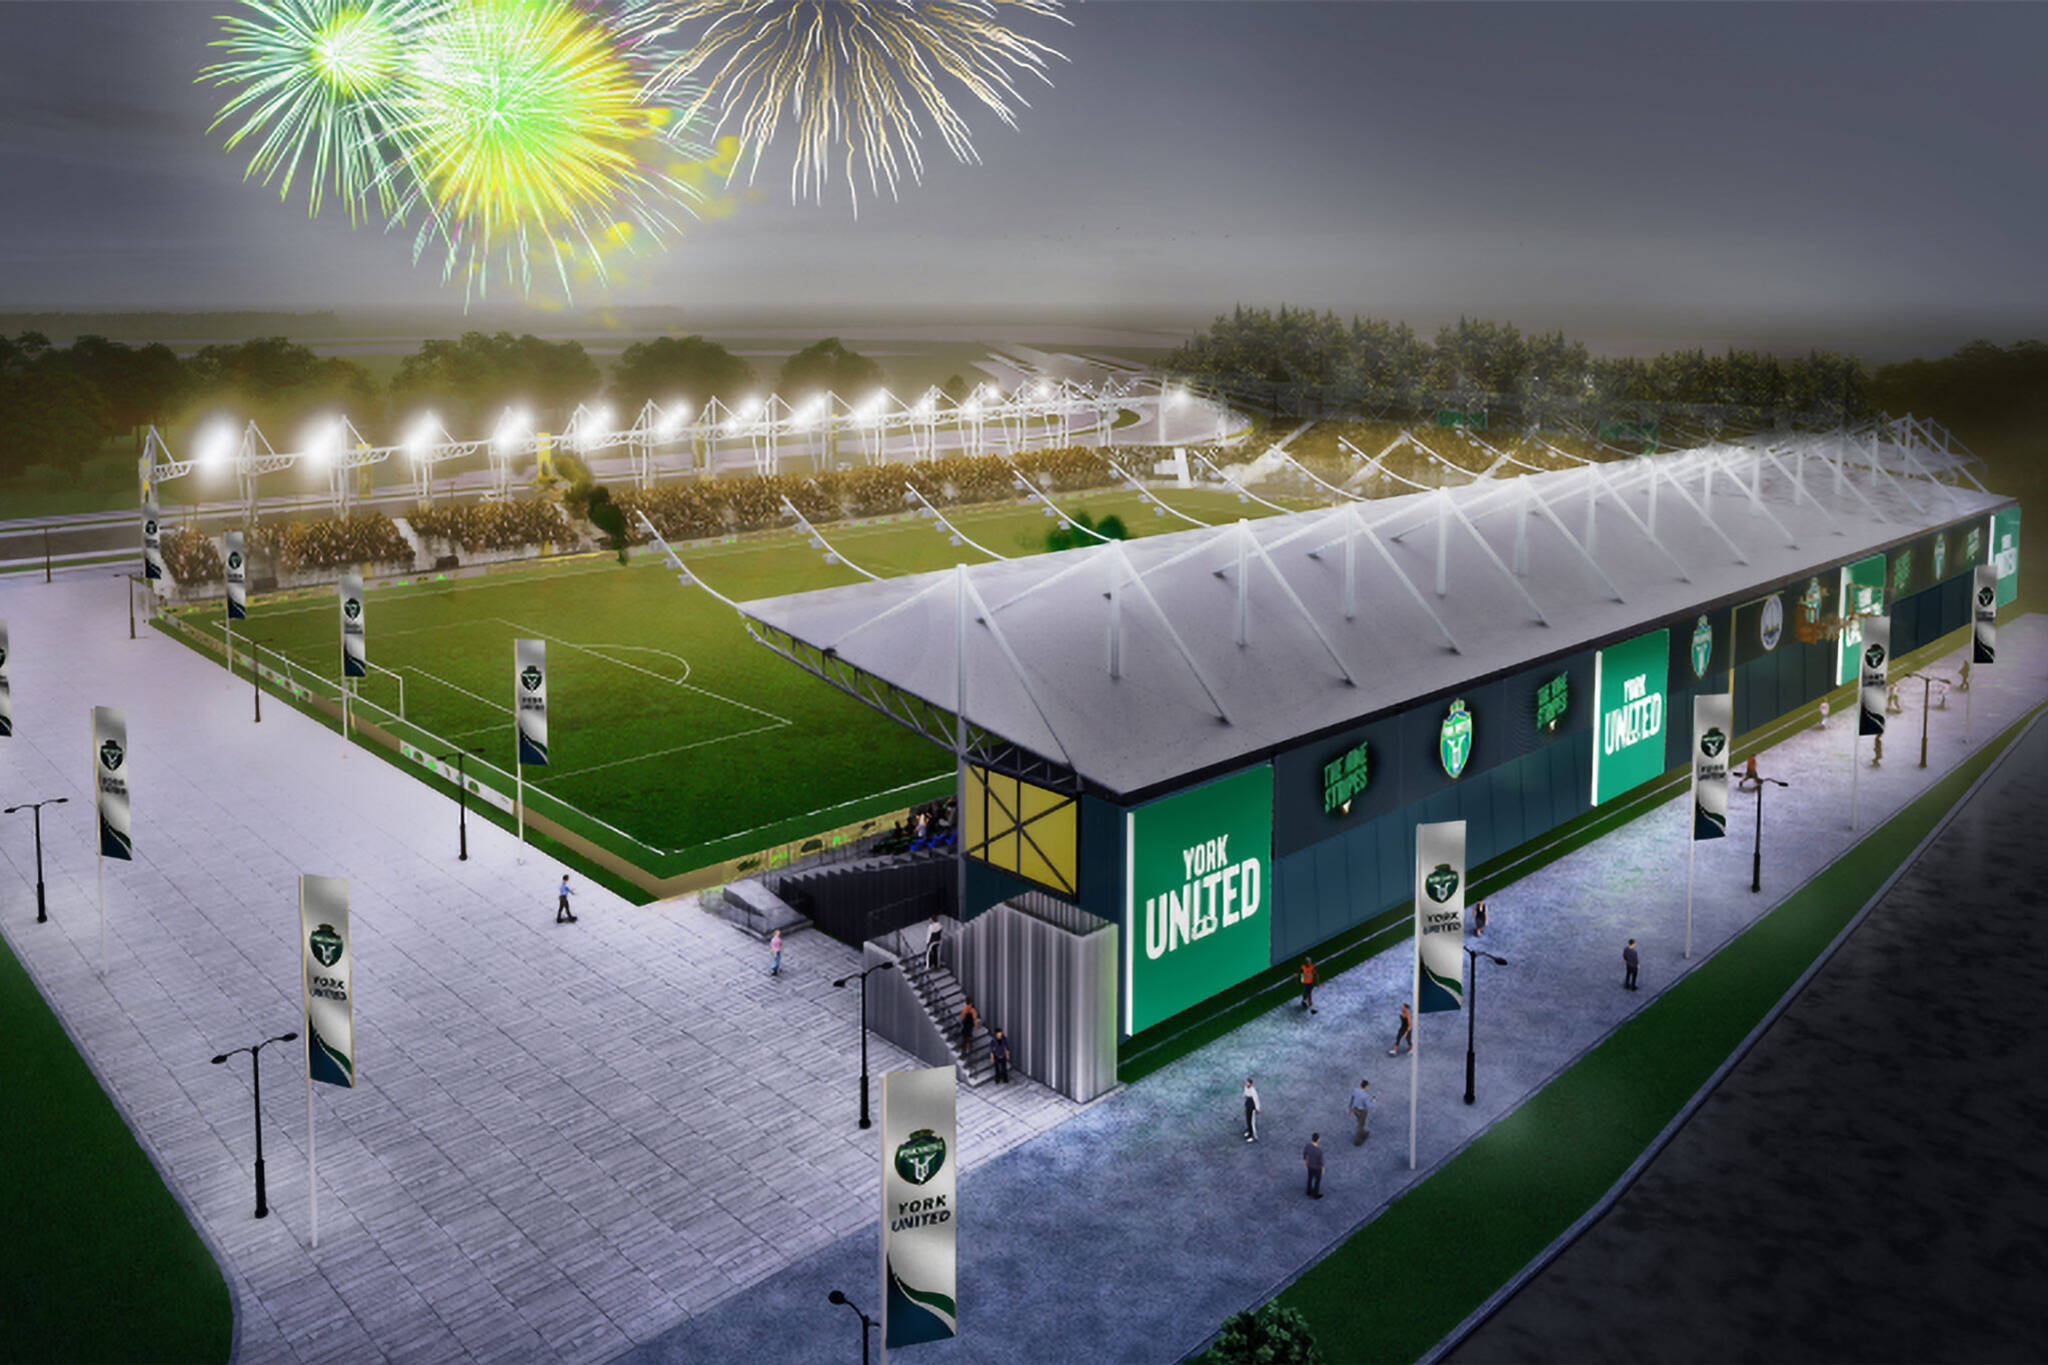 Toronto will get a brand-new soccer stadium and training centre